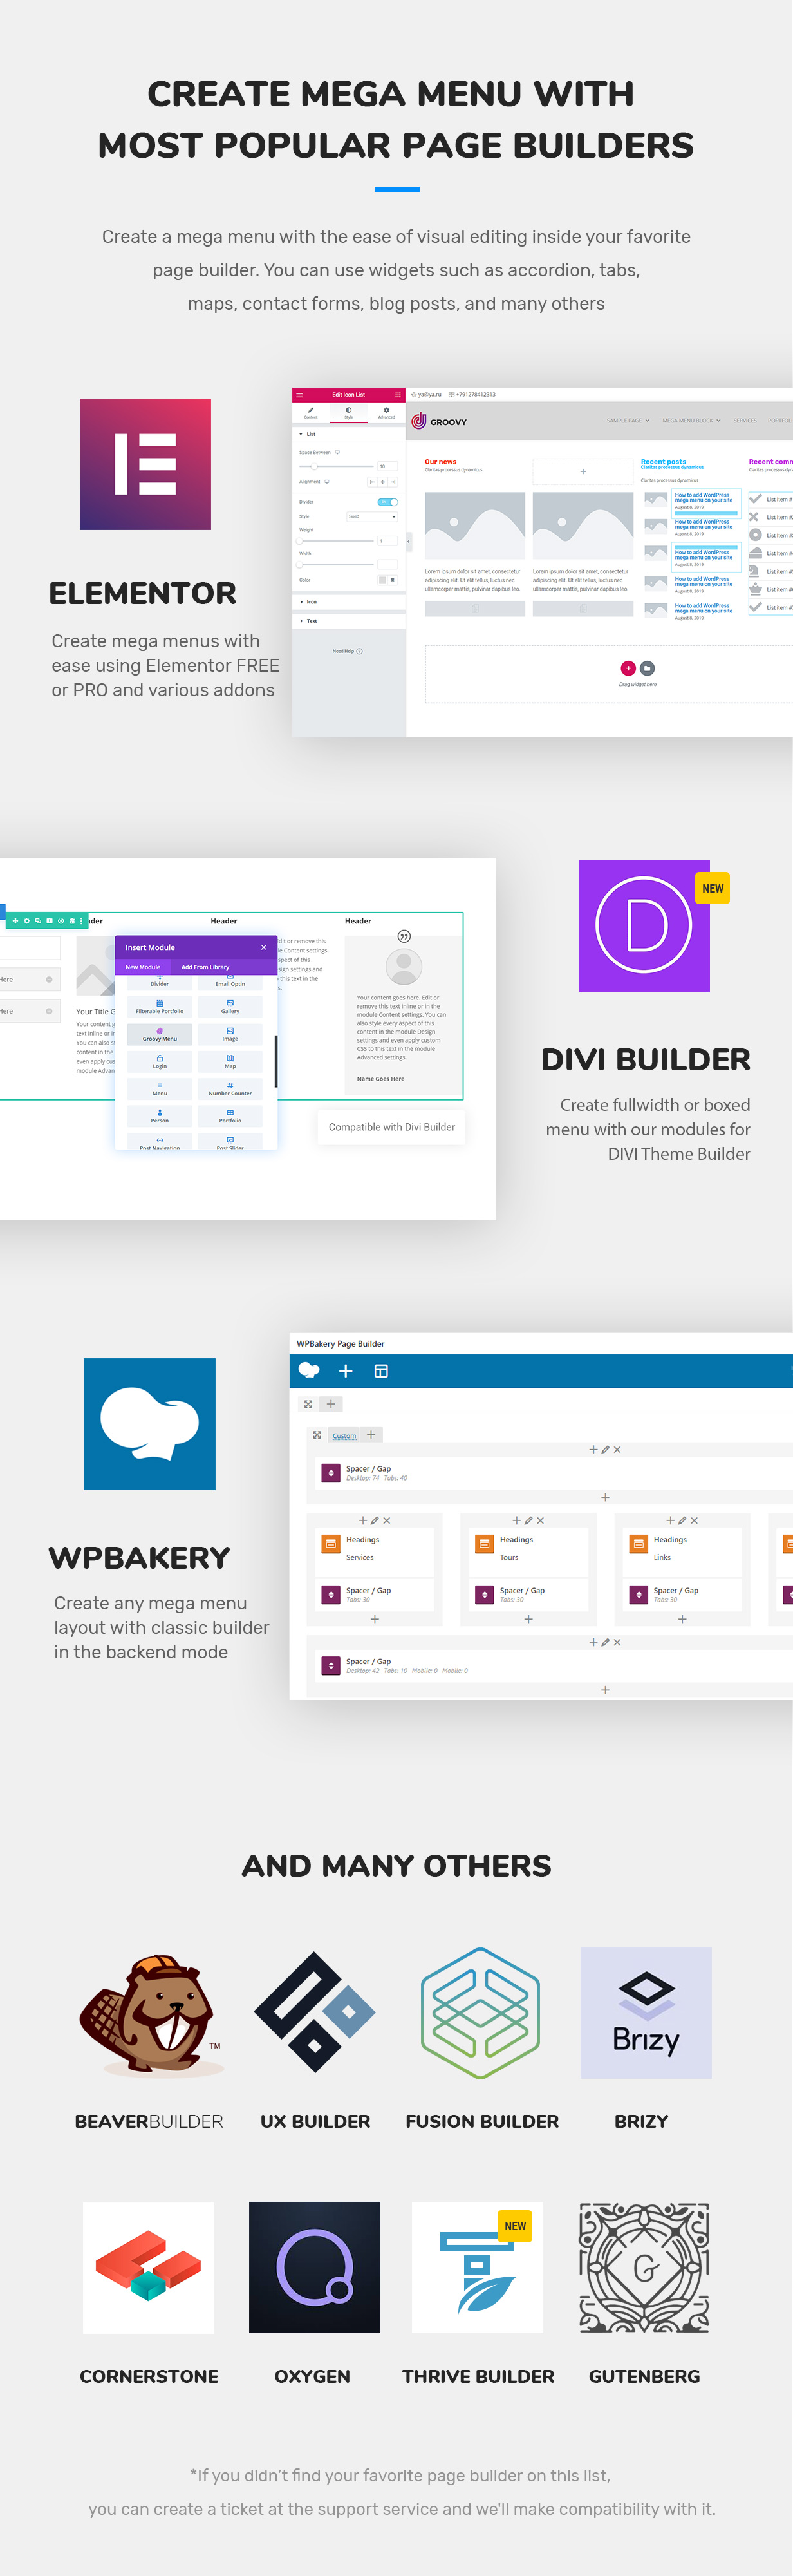 Groovy mega menu compatible page builders is a DIVI theme,  Elementor Free and PRO, WPBakery, Brizy, Oxygen, Theme Fusion, Gutenberg, Beaver Builder, UX Builder by Flatsome, Cornerstone, Thrive Themes Builder 2021